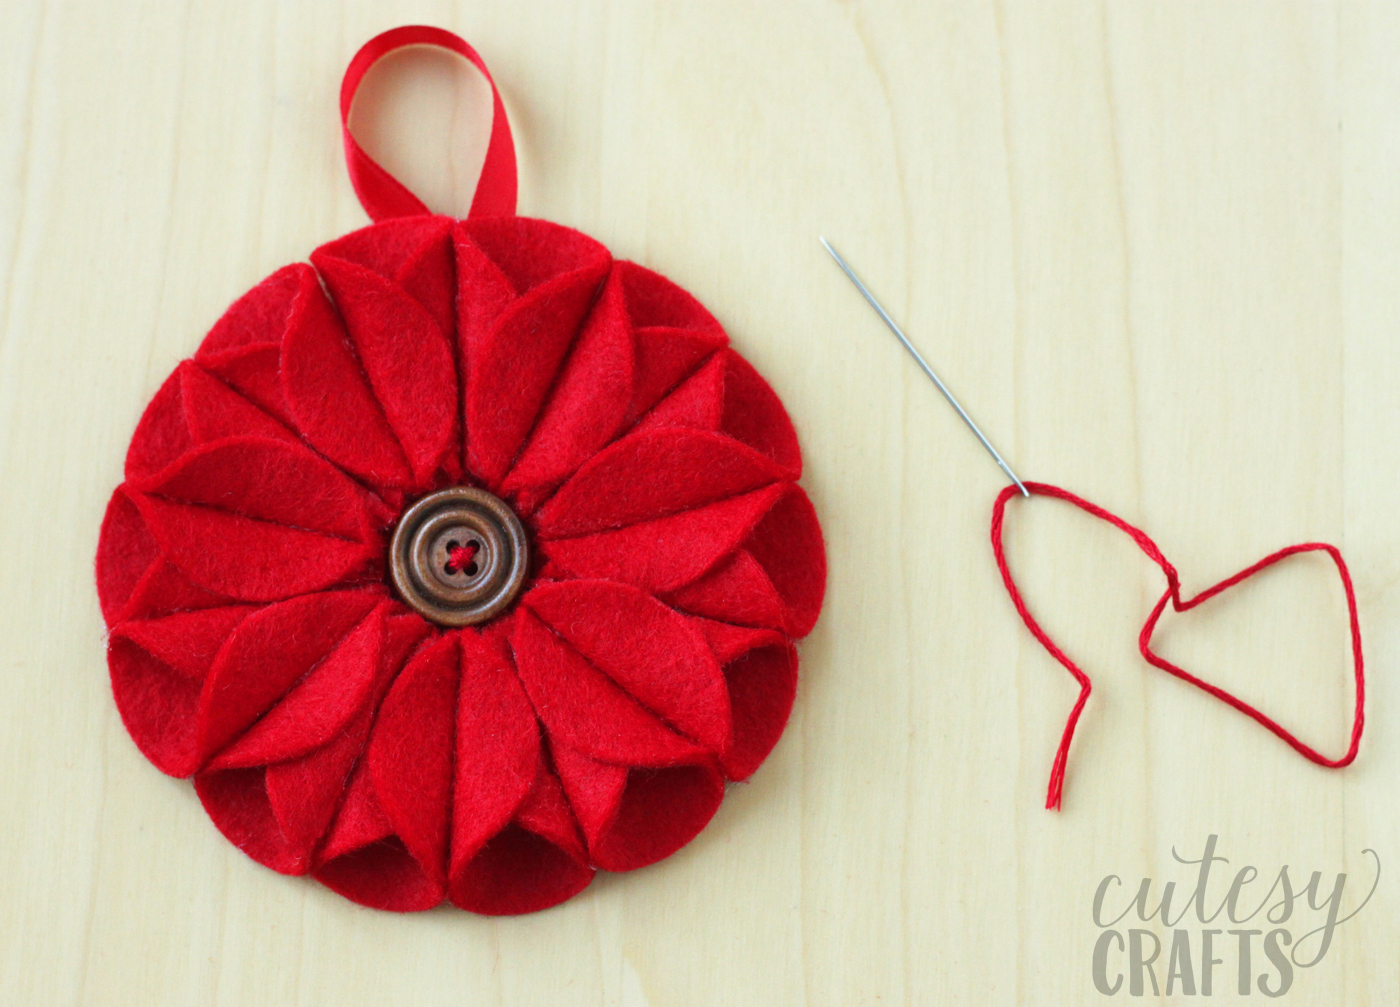 Button sewn into the middle of an poinsettia ornament